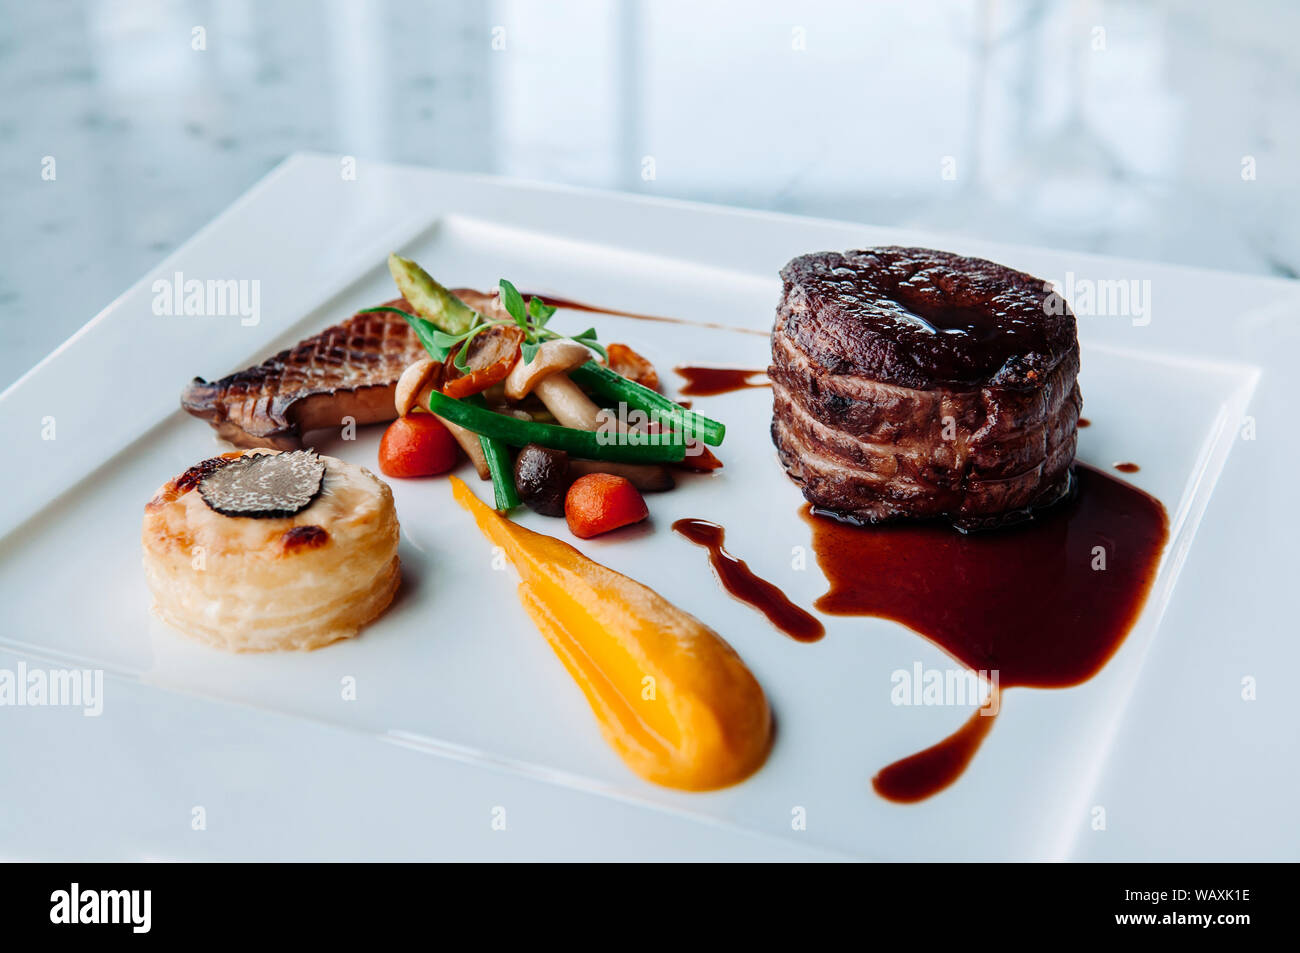 Fillet mignon steak in nice white plate with fine dining style dish decoration Stock Photo